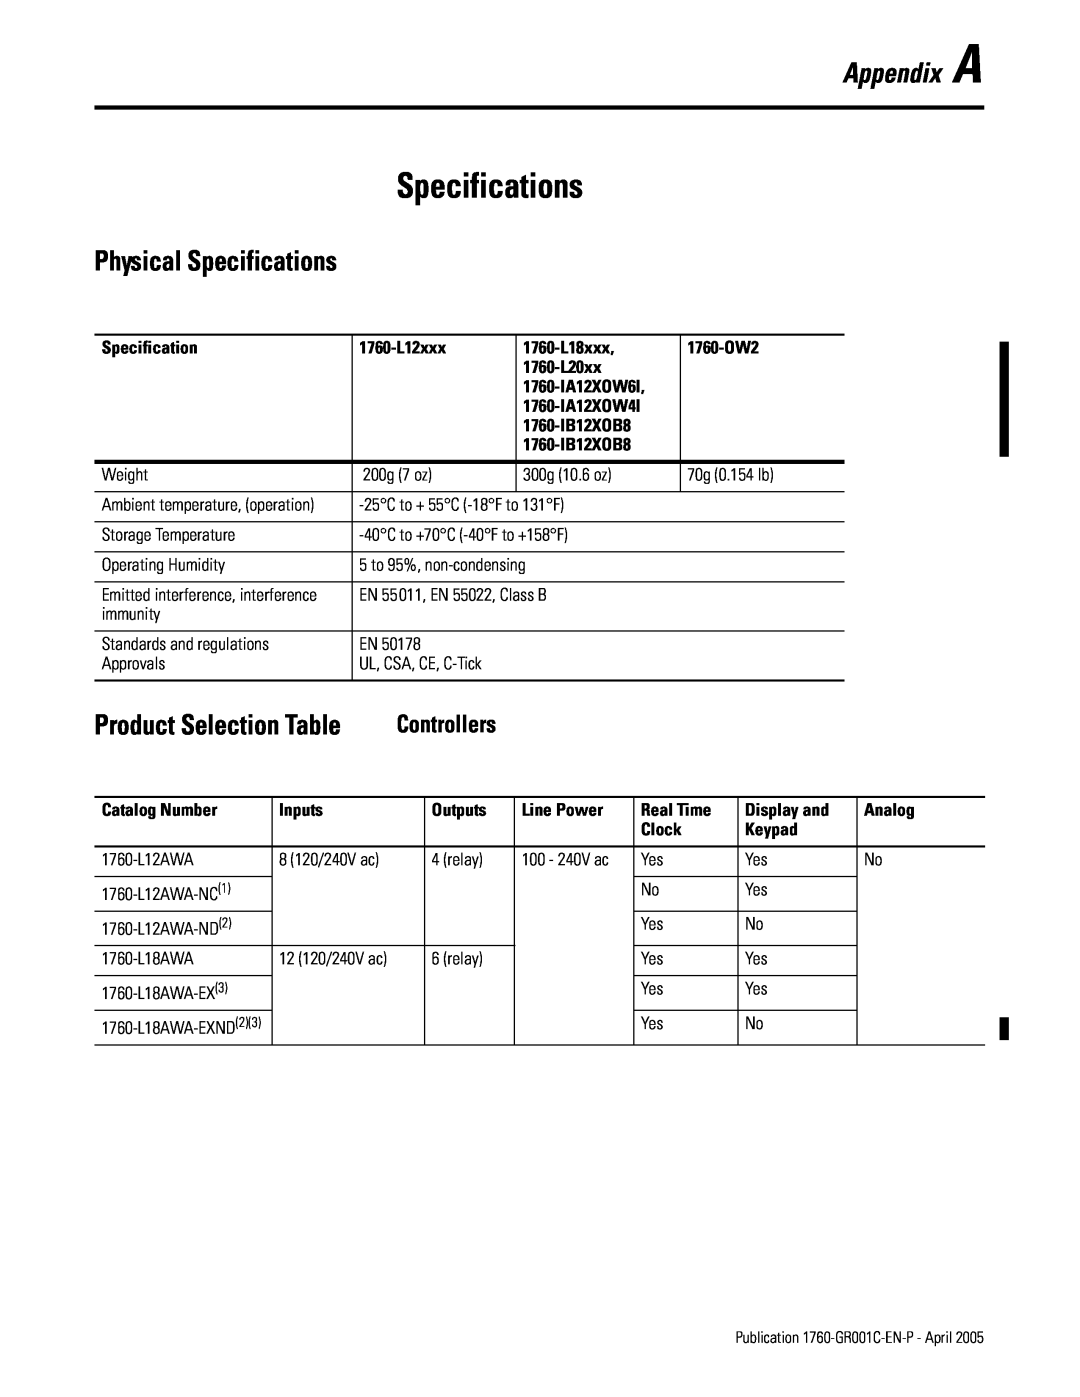 AB Soft 1760 manual Appendix A, Physical Specifications, Product Selection Table 